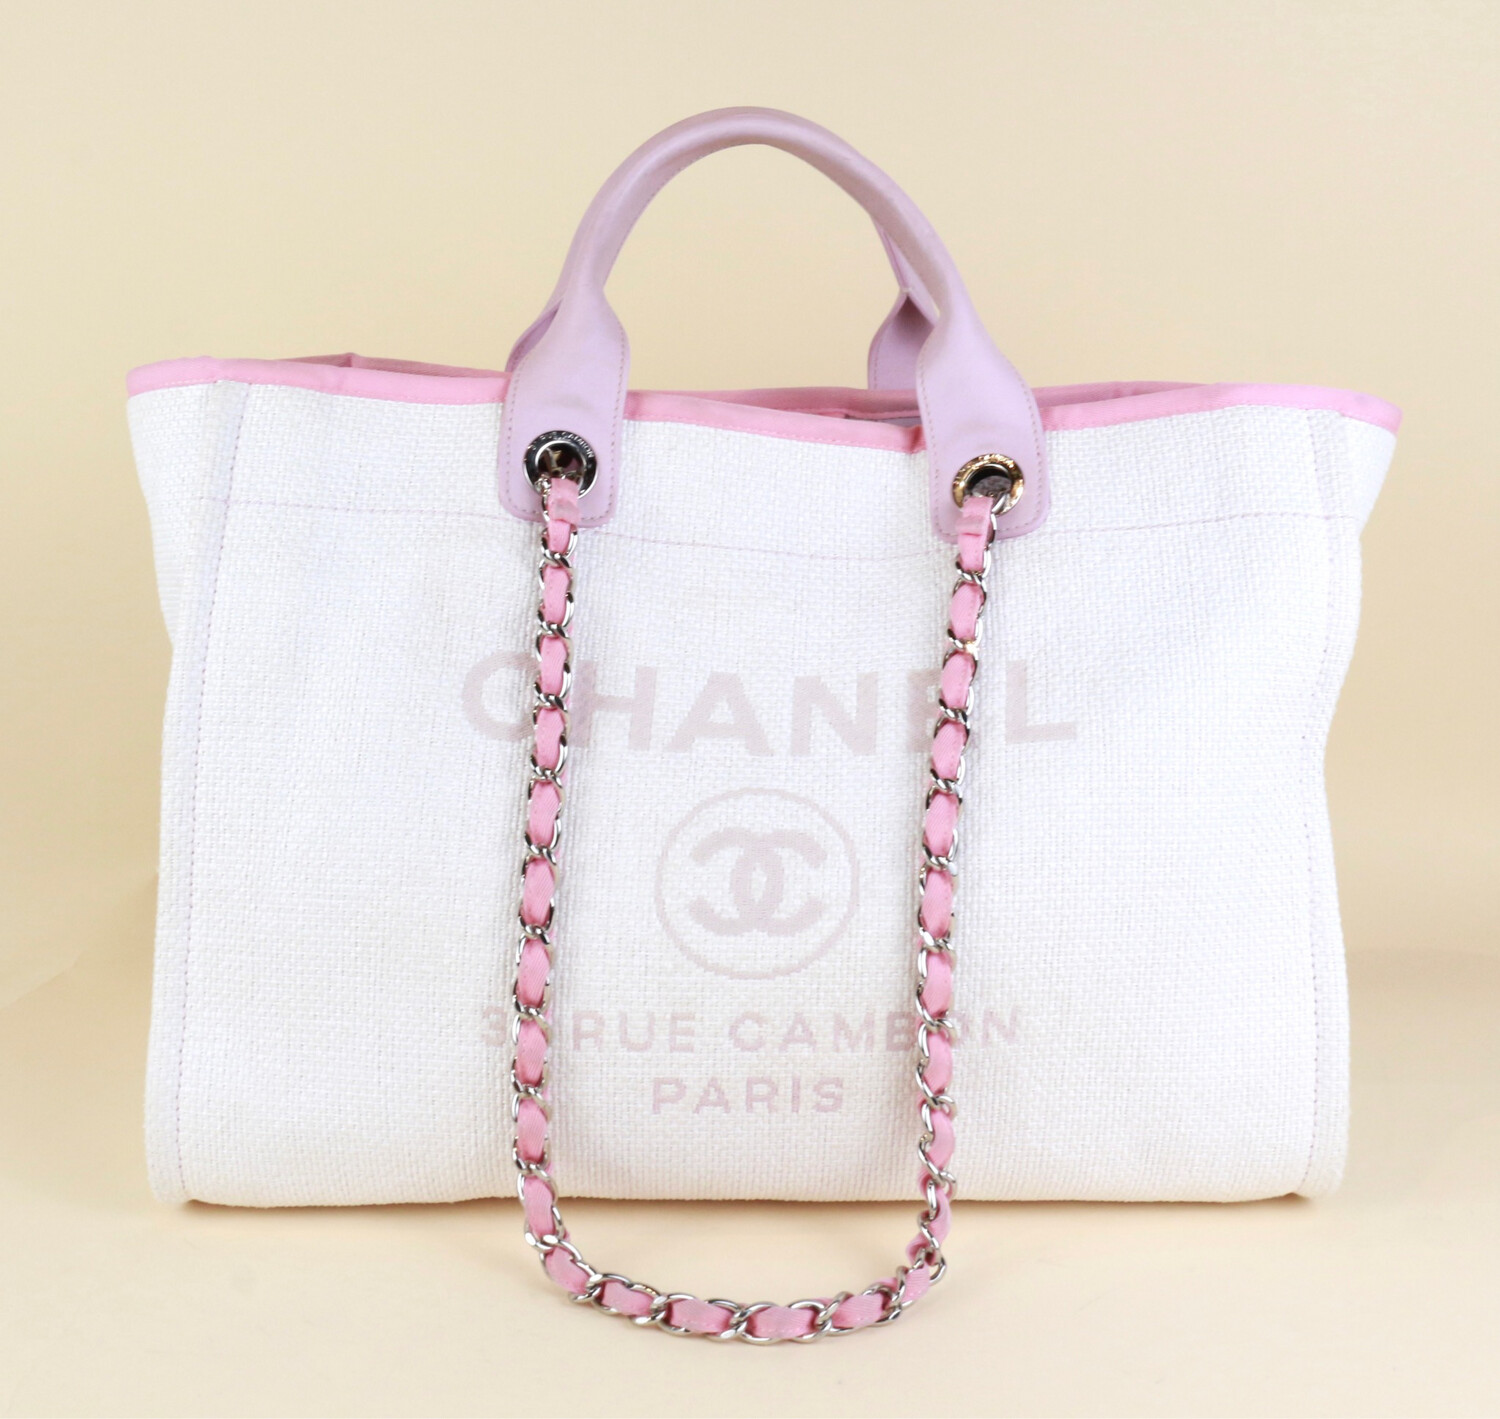 ​Chanel Deauville Shopping Tote Light Pink